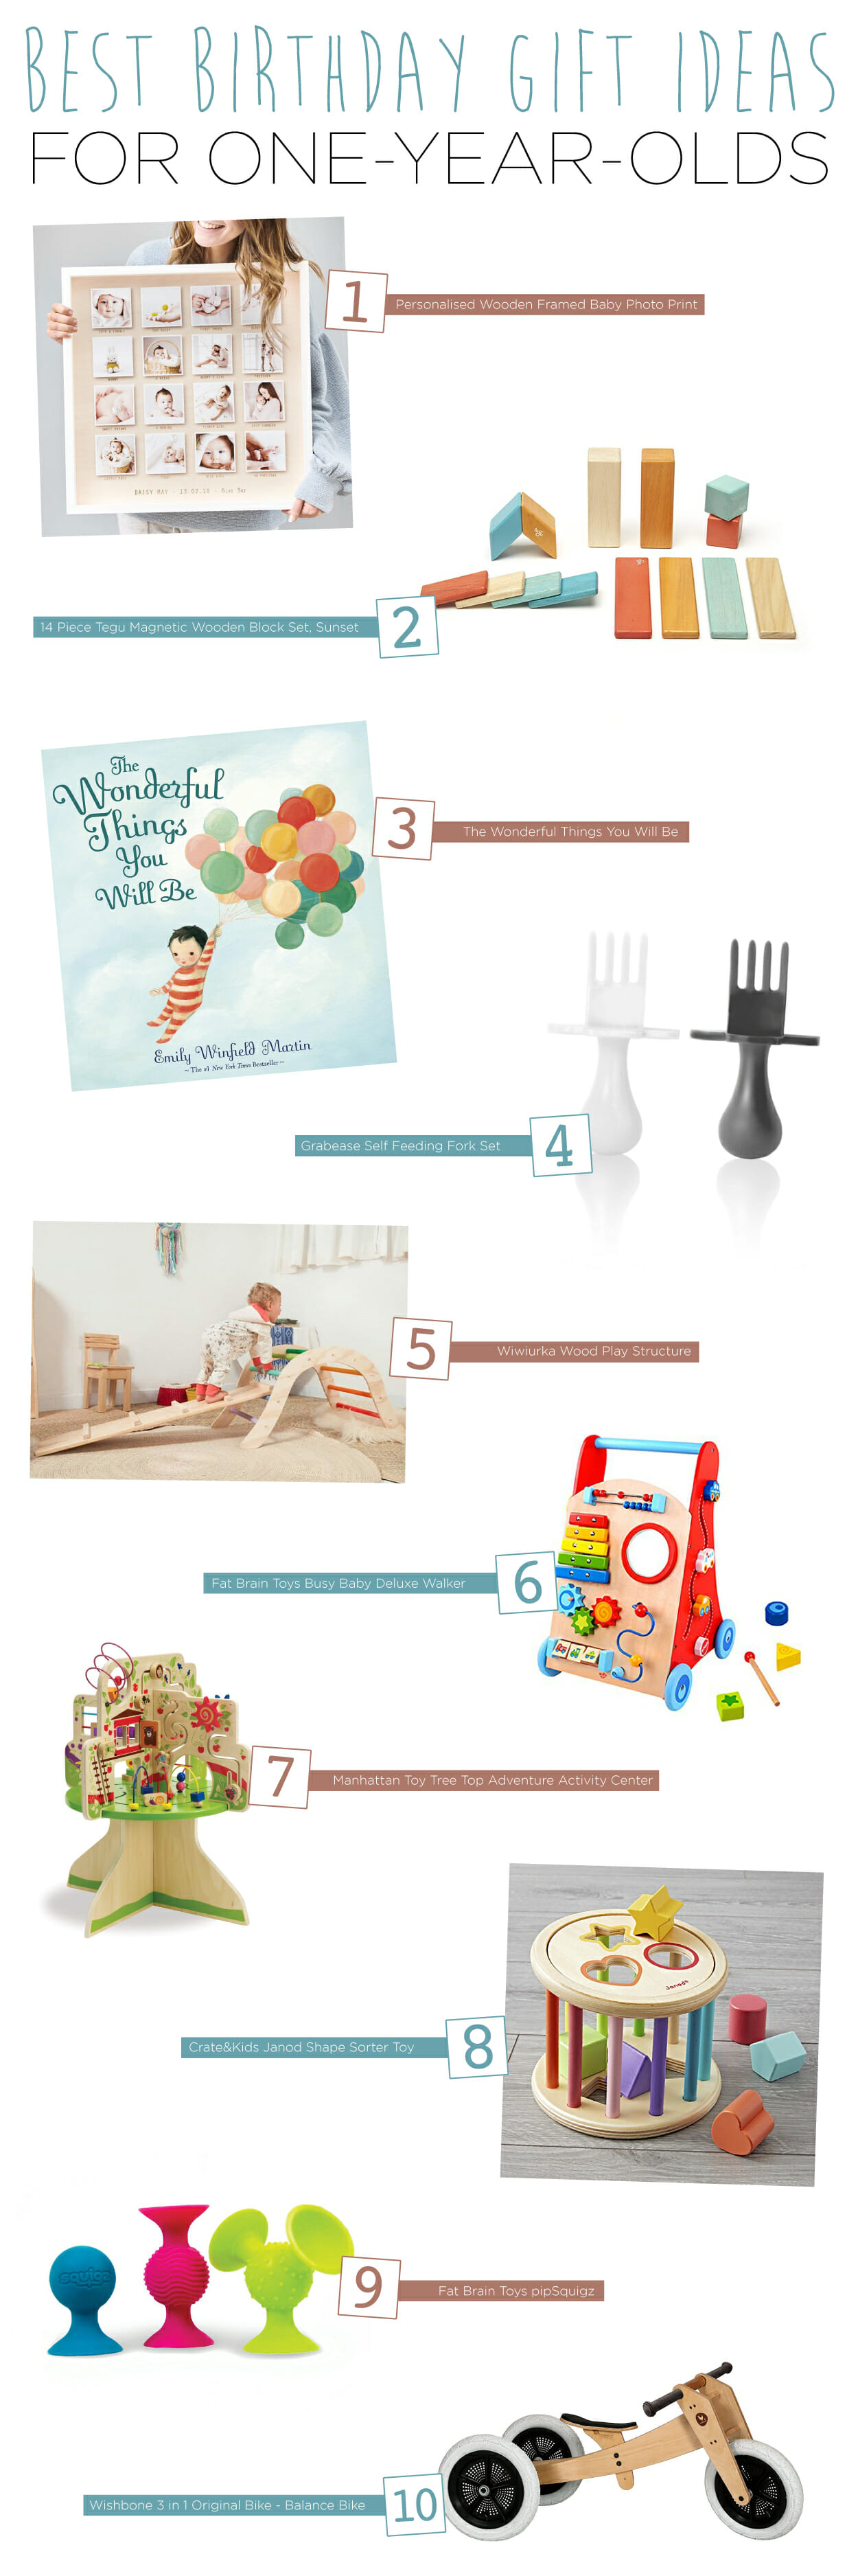 Birthday Gift Ideas for 1-Year-Olds 